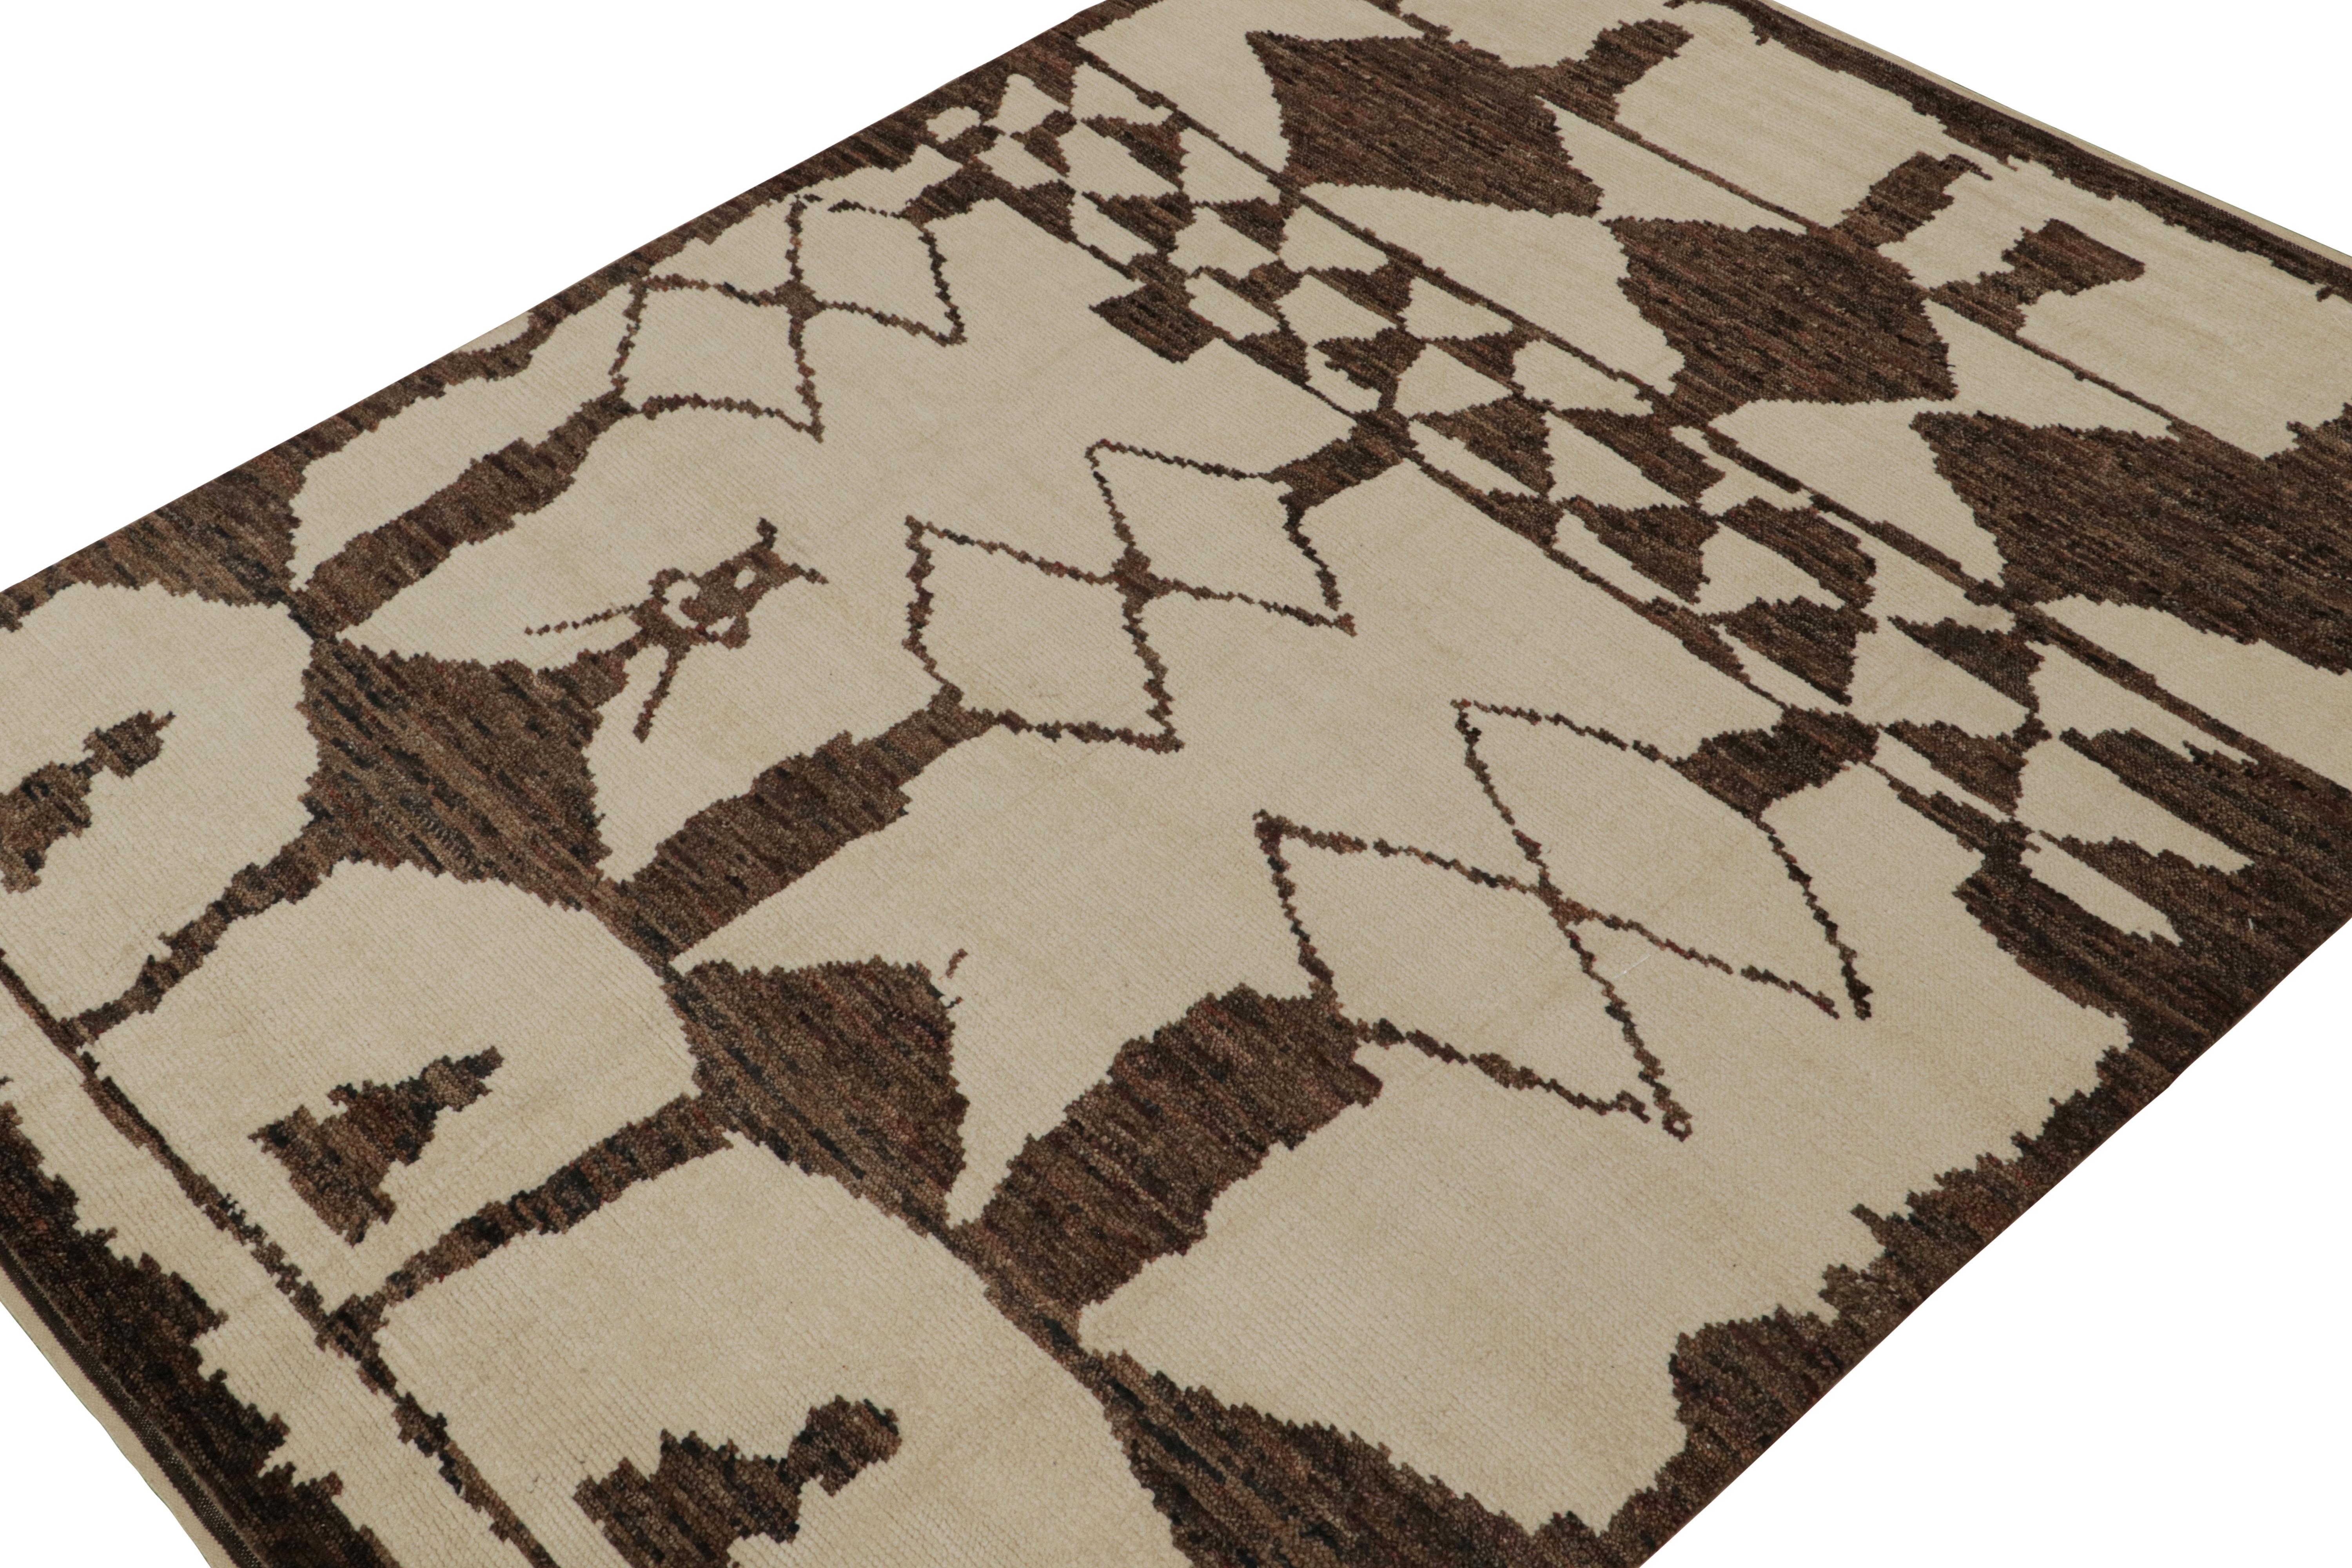 Hand-knotted in wool, this 10x14 contemporary rug is a new addition to the Moroccan rug collection by Rug & Kilim. 

On the Design

This rug enjoys a cream and beige undertone with chocolate brown lozenges and other geometric patterns of primitivist